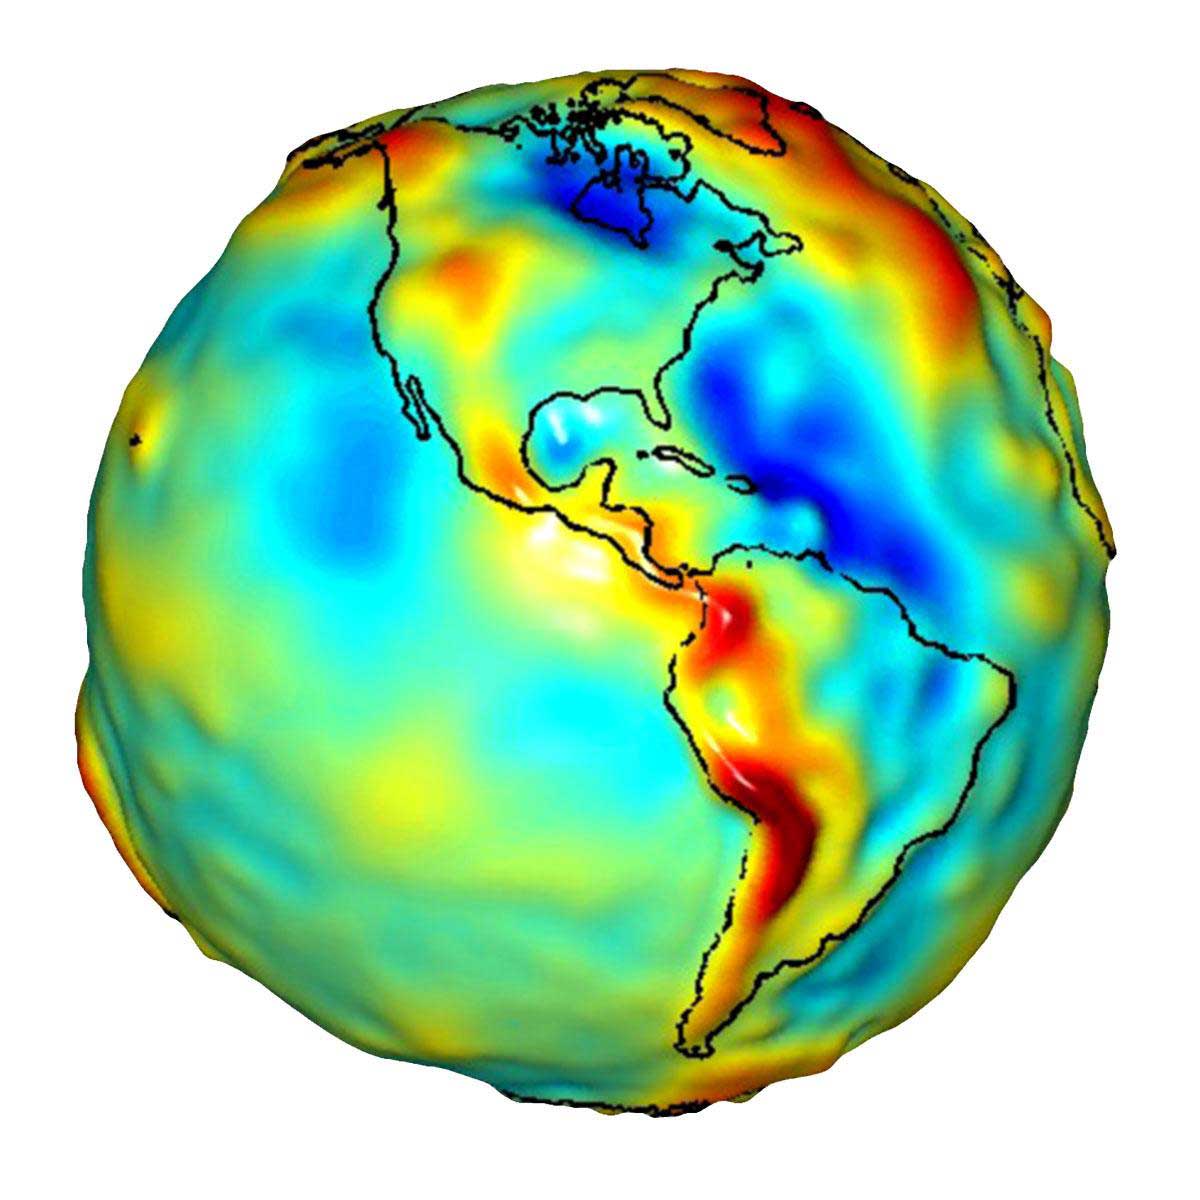 Gravity anomaly map
created with data from
GRACE, showing variations
in the gravity field across the
Americas. Yellow, orange, and
red represent places where
gravity is higher than it would
be if the Earth was perfectly
smooth and featureless (e.g., a
mountain range). Progressively
blue areas show where the
gravity field is less than what
is predicted for a featureless
planet (e.g., an ocean trench).